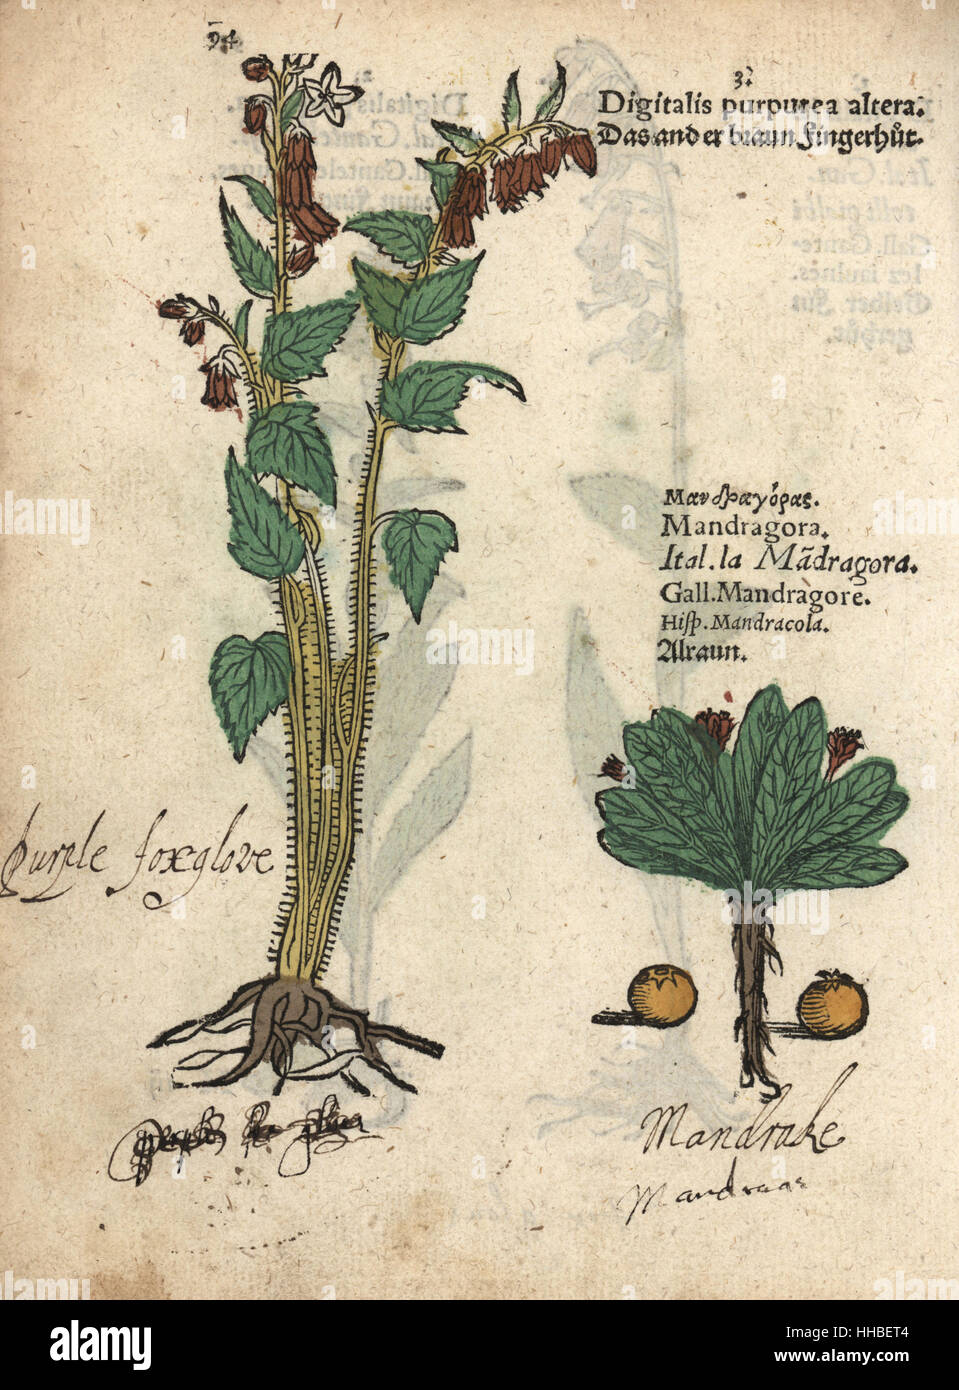 Purple foxglove, Digitalis purpurea altera, and mandrake, Mandragora officinarum. Handcoloured woodblock engraving of a botanical illustration from Adam Lonicer's Krauterbuch, or Herbal, Frankfurt, 1557. This from a 17th century pirate edition or atlas of illustrations only, with captions in Latin, Greek, French, Italian, German, and in English manuscript. Stock Photo